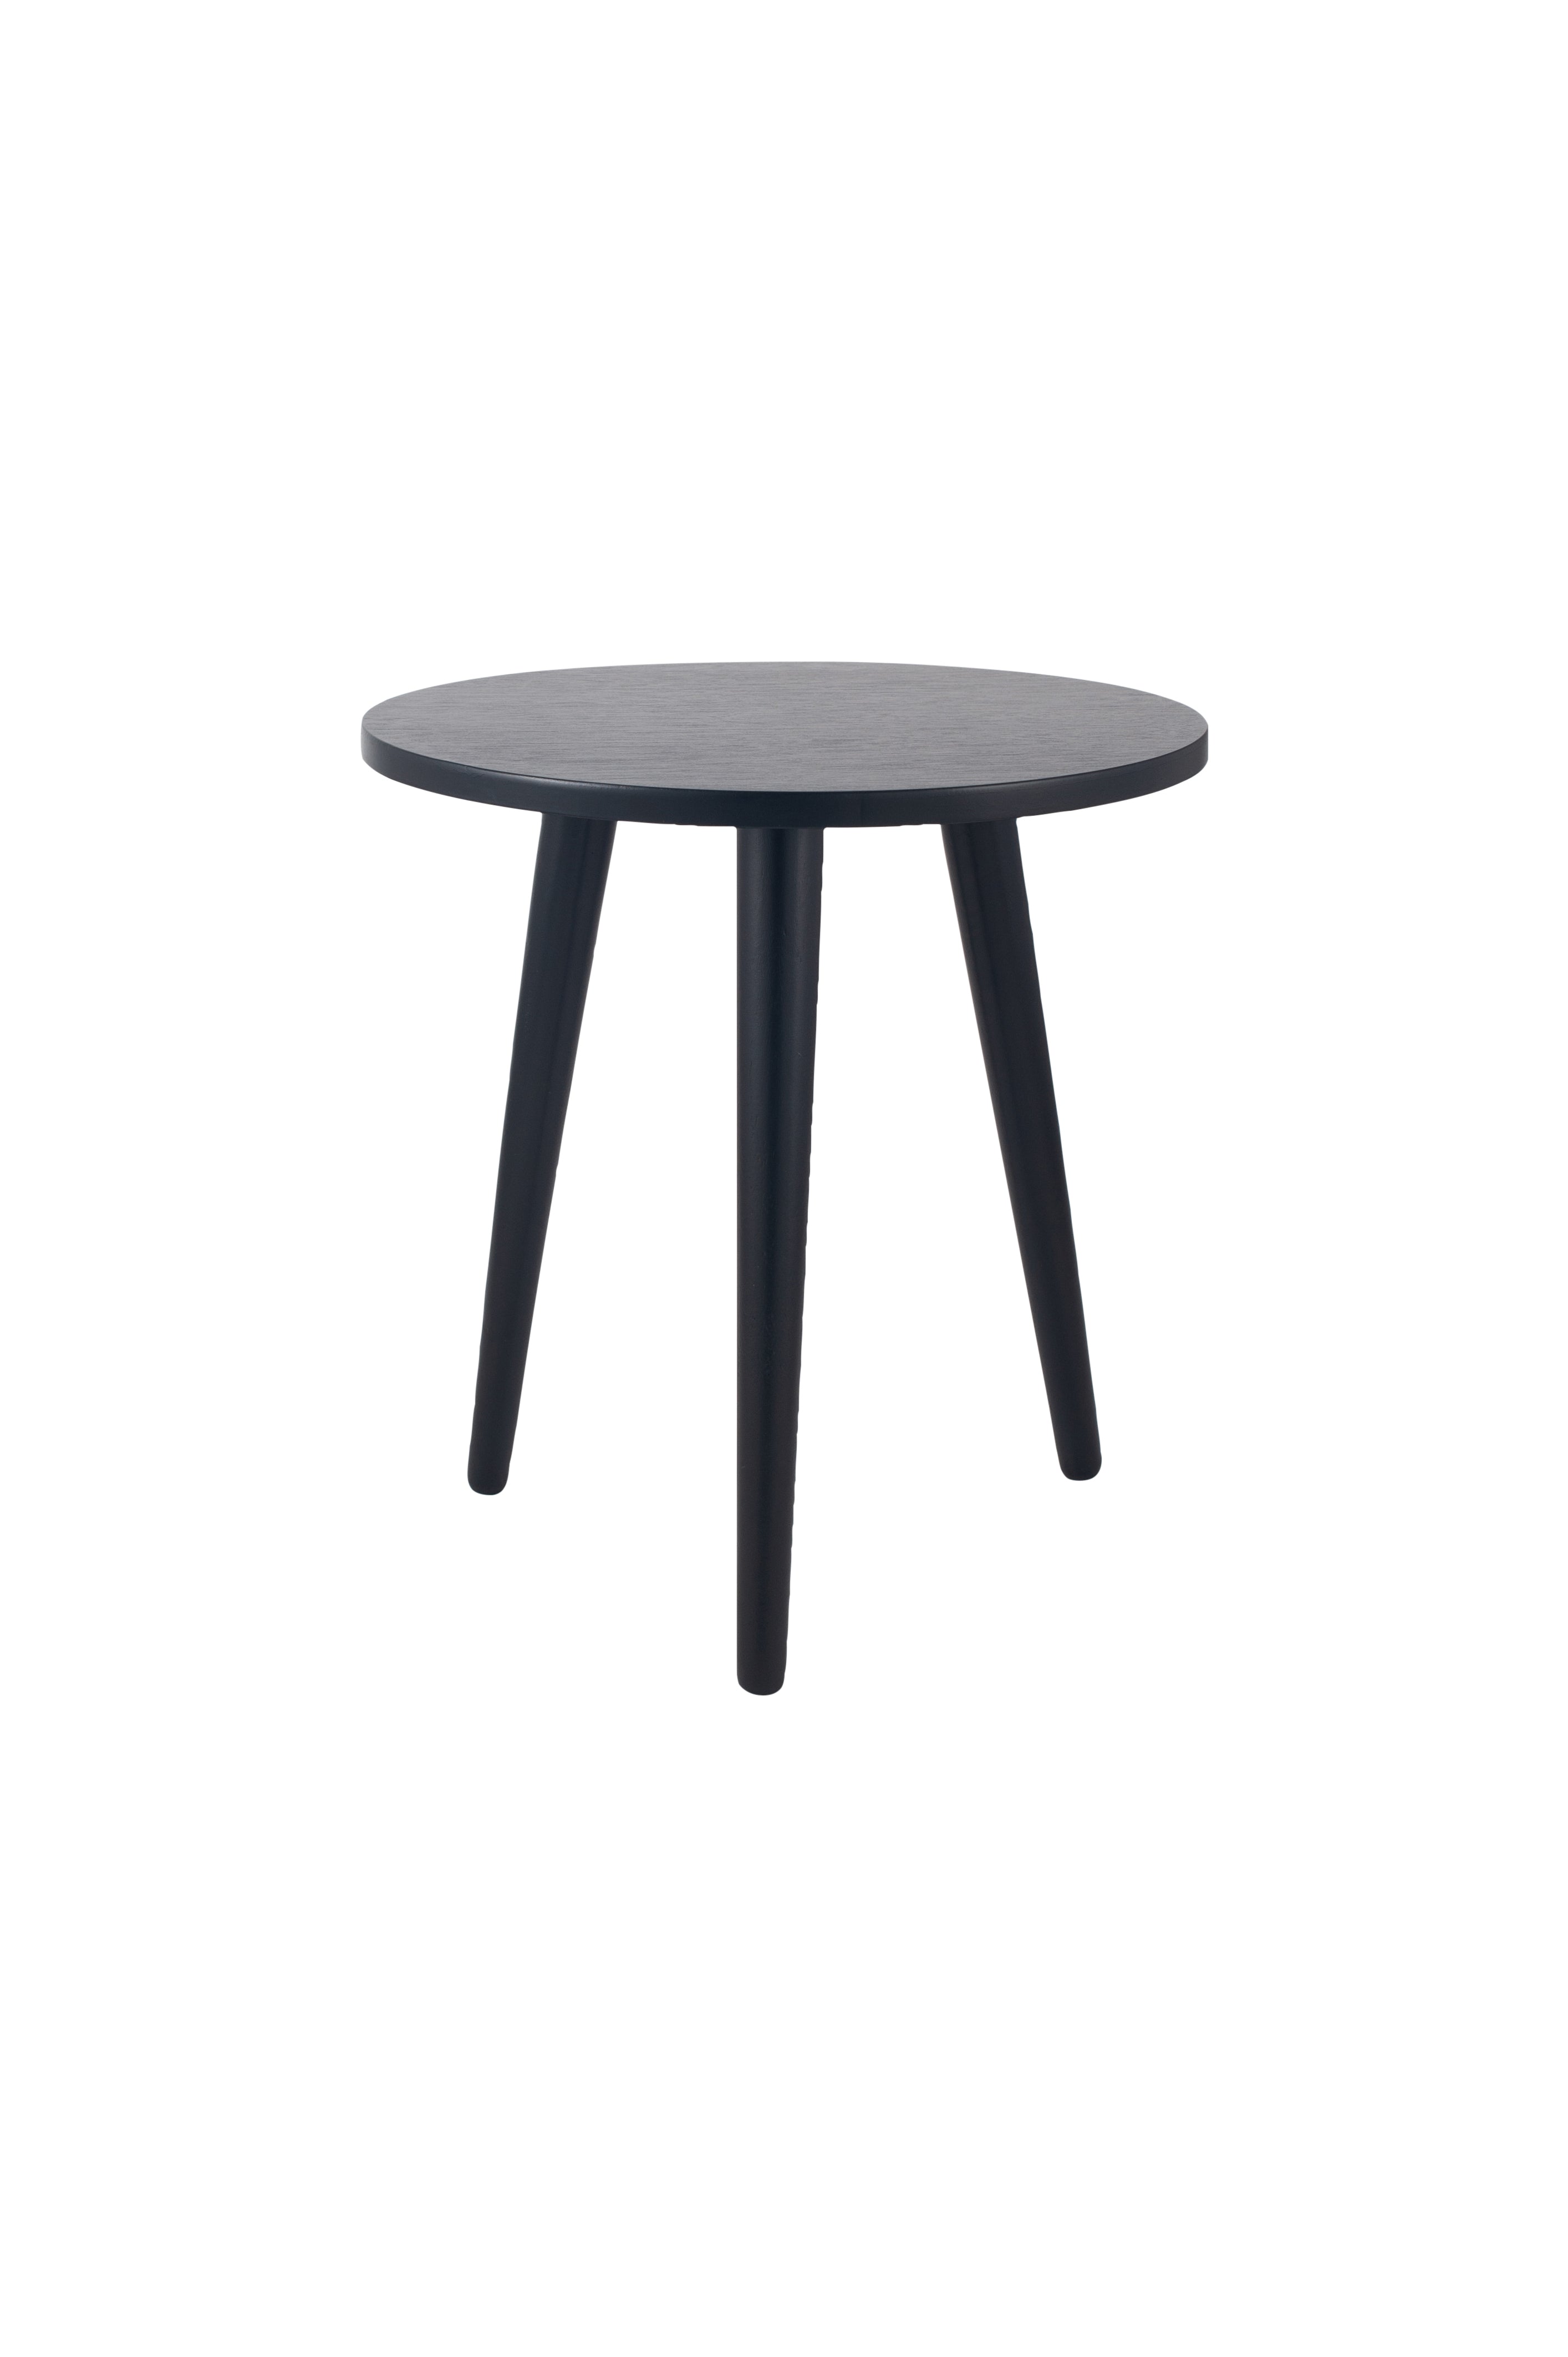 Chelmsford Satin Black Pine Wood Round Side Table K/D